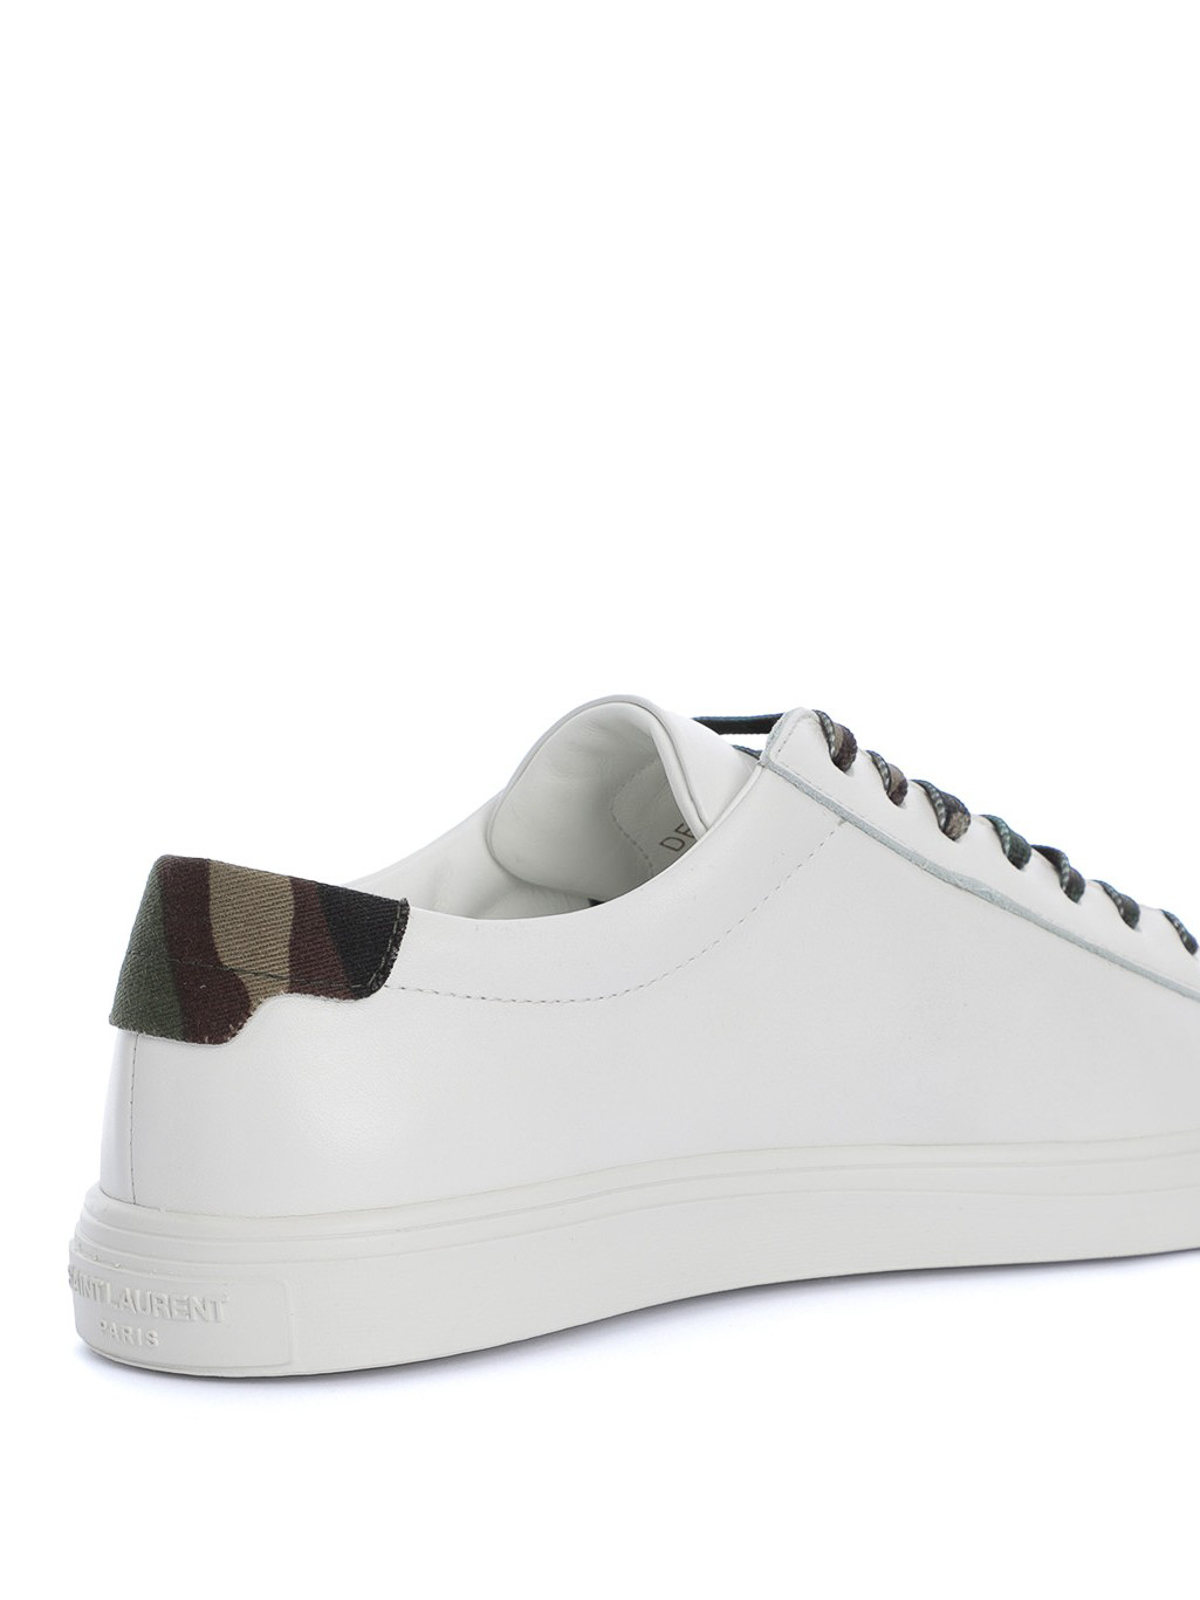 Trainers Saint - sneakers - 6112740ZS609373 |